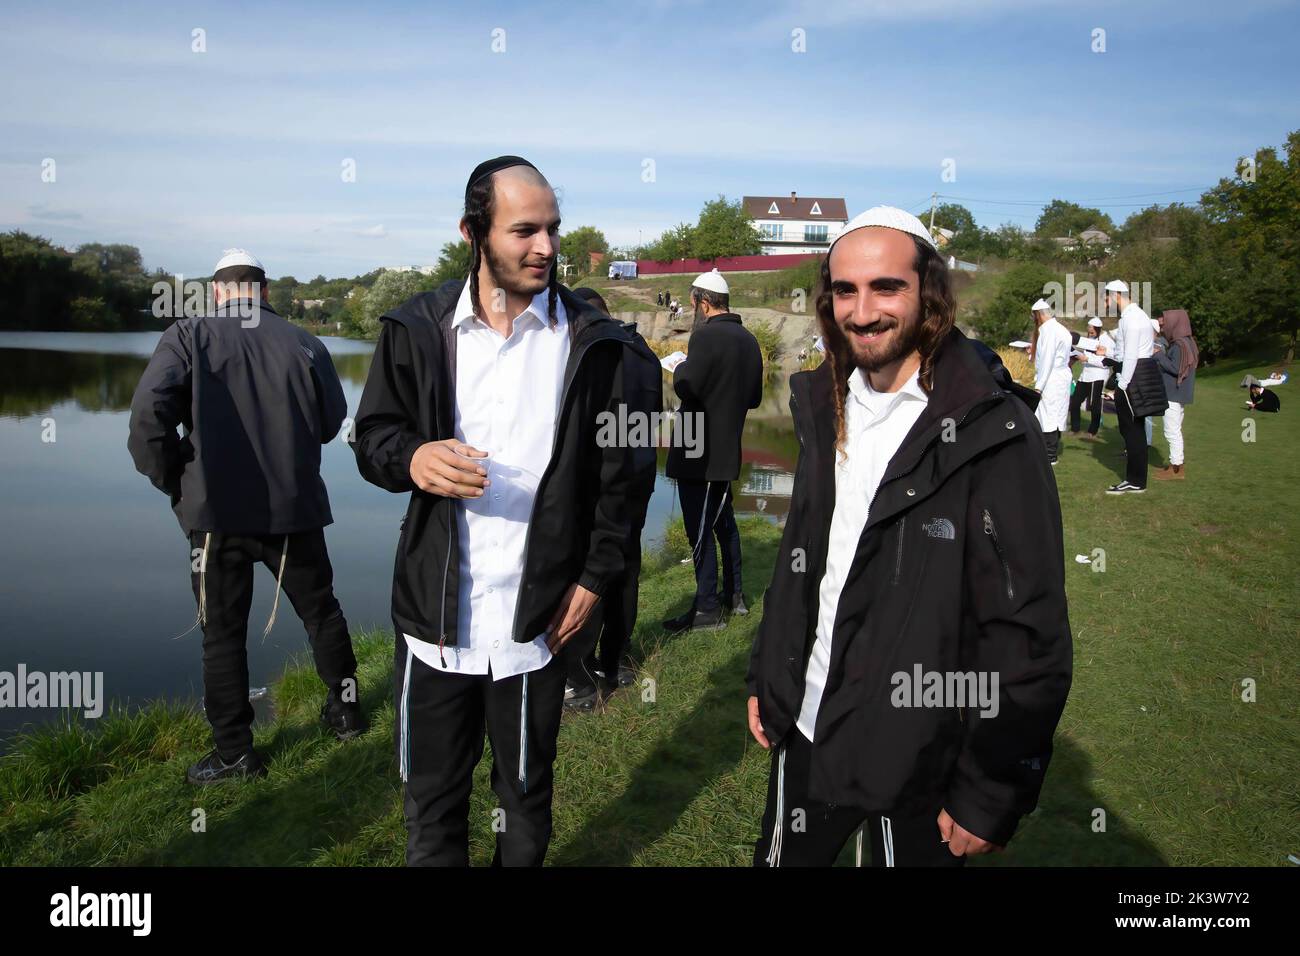 Ultra-Orthodox Jewish pilgrims are seen during the celebration. Every year, thousands of Orthodox Bratslav Hasidic Jews from different countries gather in Uman to mark Rosh Hashanah, Jewish New Year, near the tomb of Rabbi Nachman, a great-grandson of the founder of Hasidism. Stock Photo